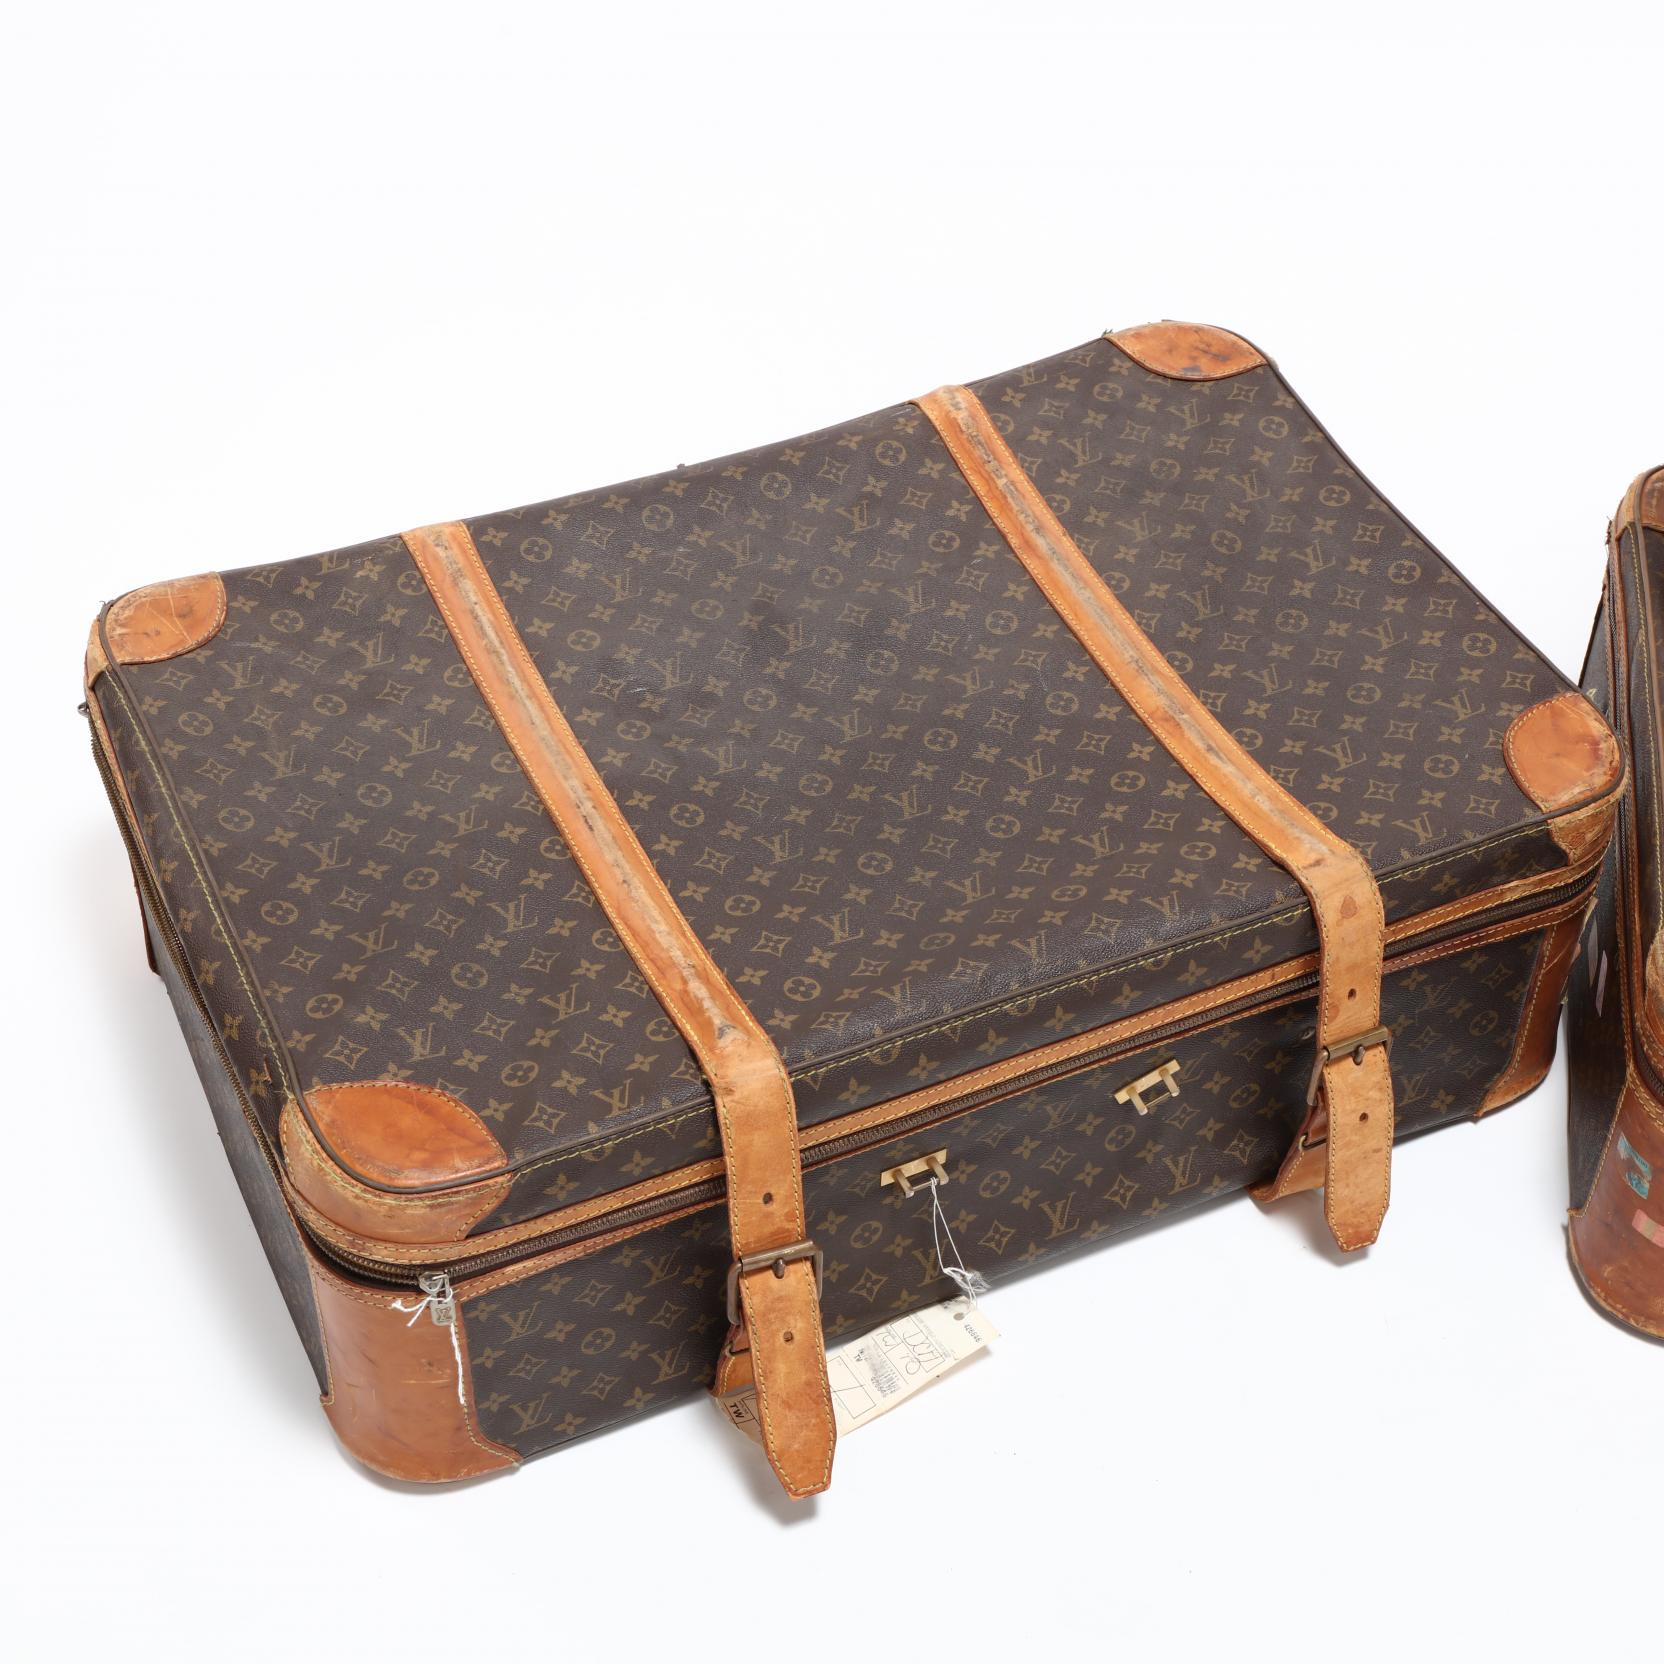 Sold at Auction: Koffer Louis Vuitton